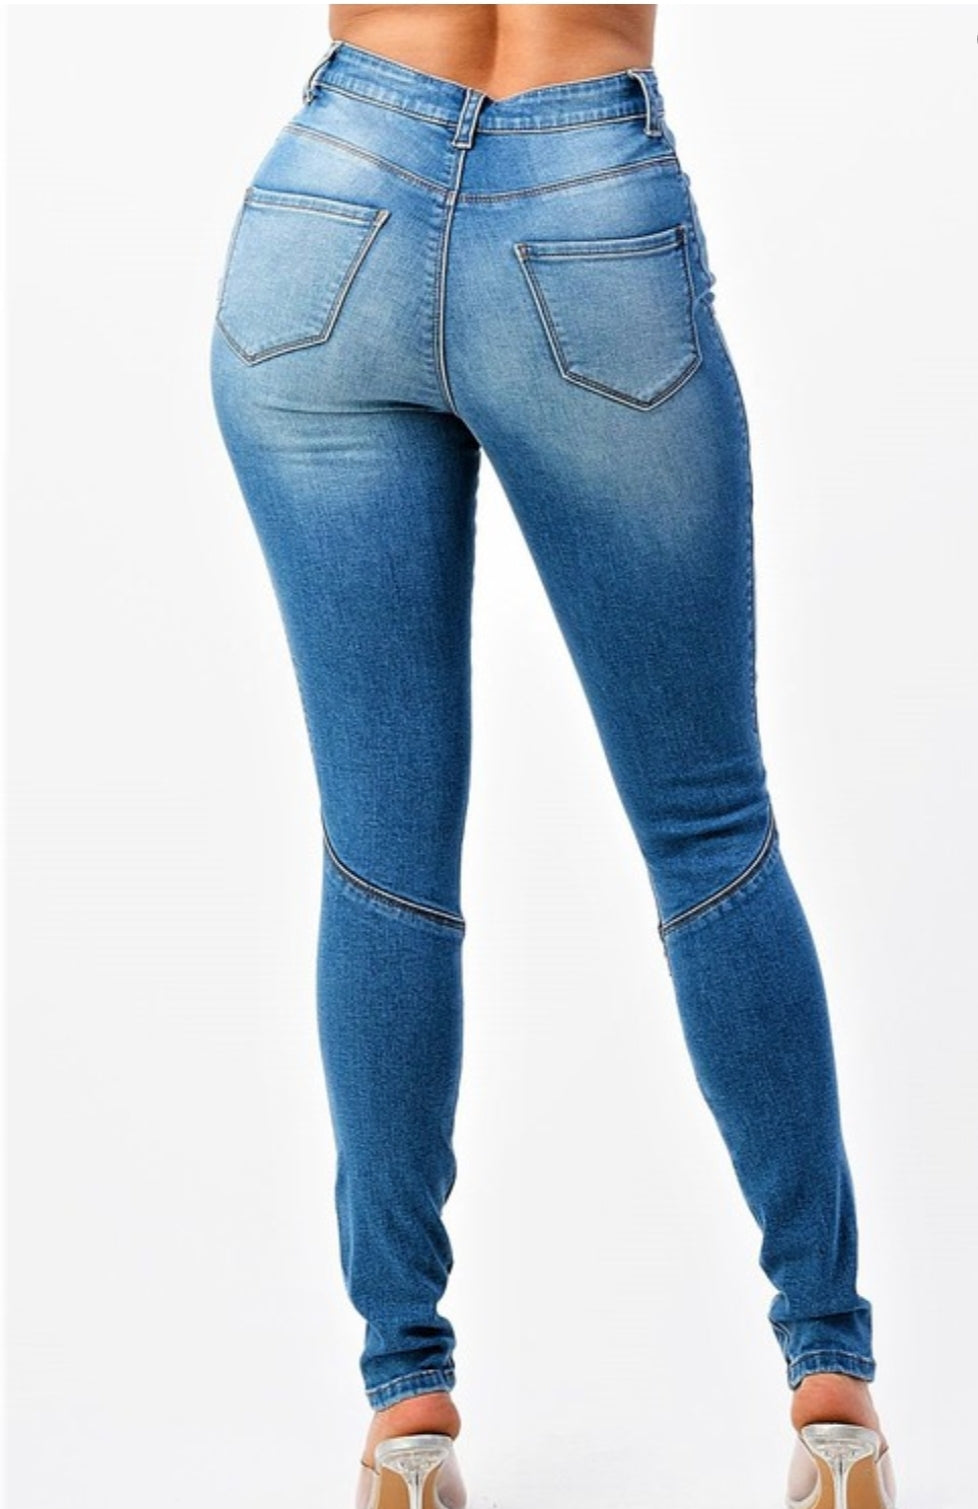 Distressed Jeans ( sizes 7-11)